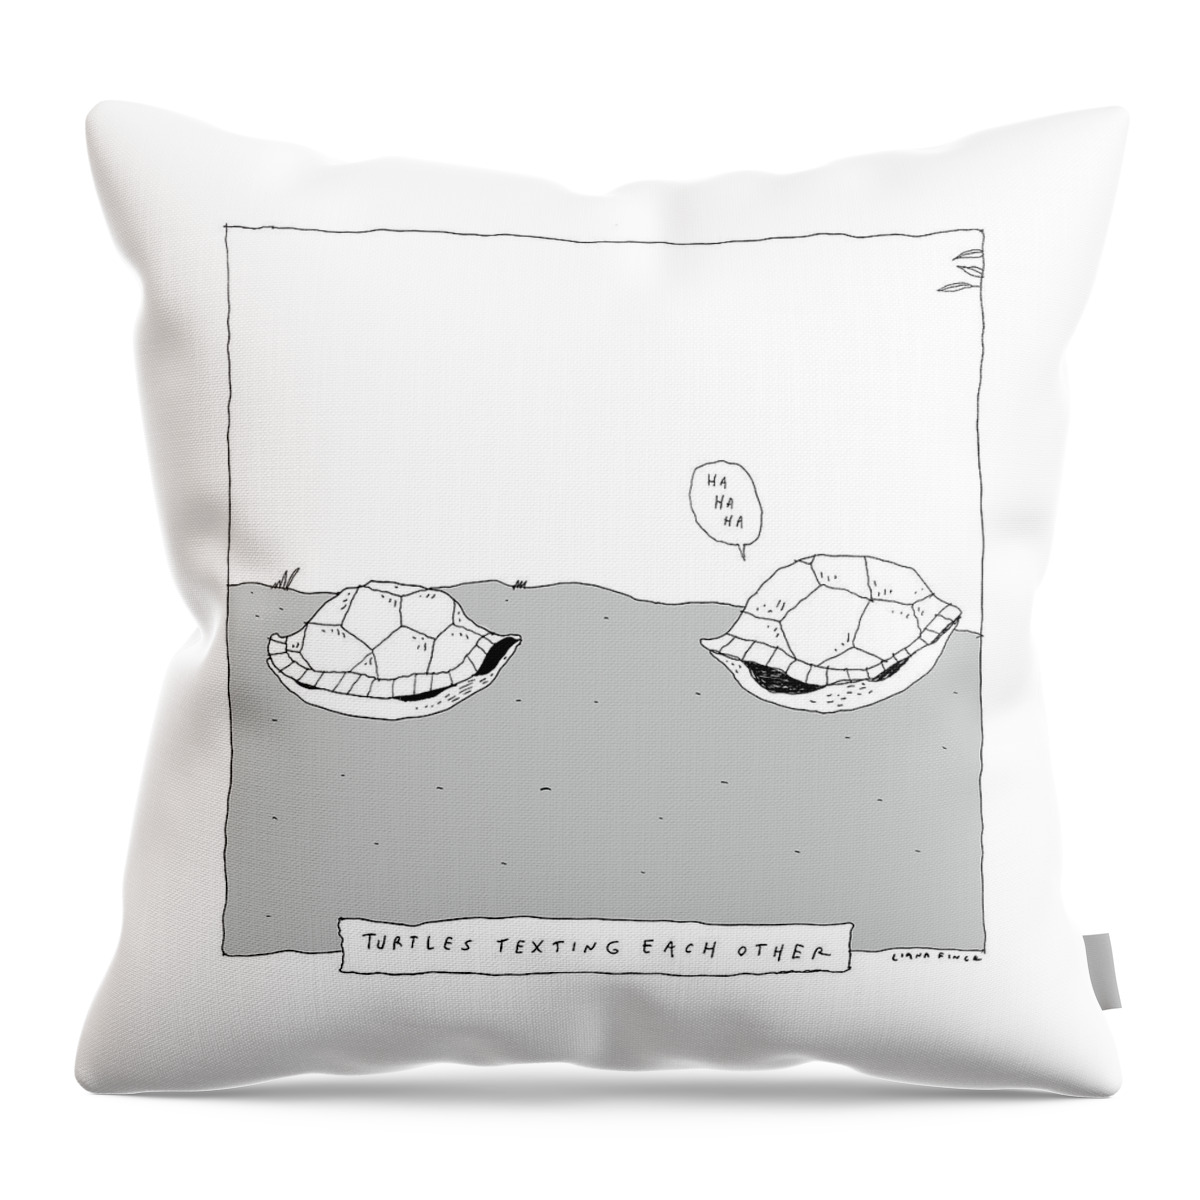 Turtles Texting Each Other Throw Pillow